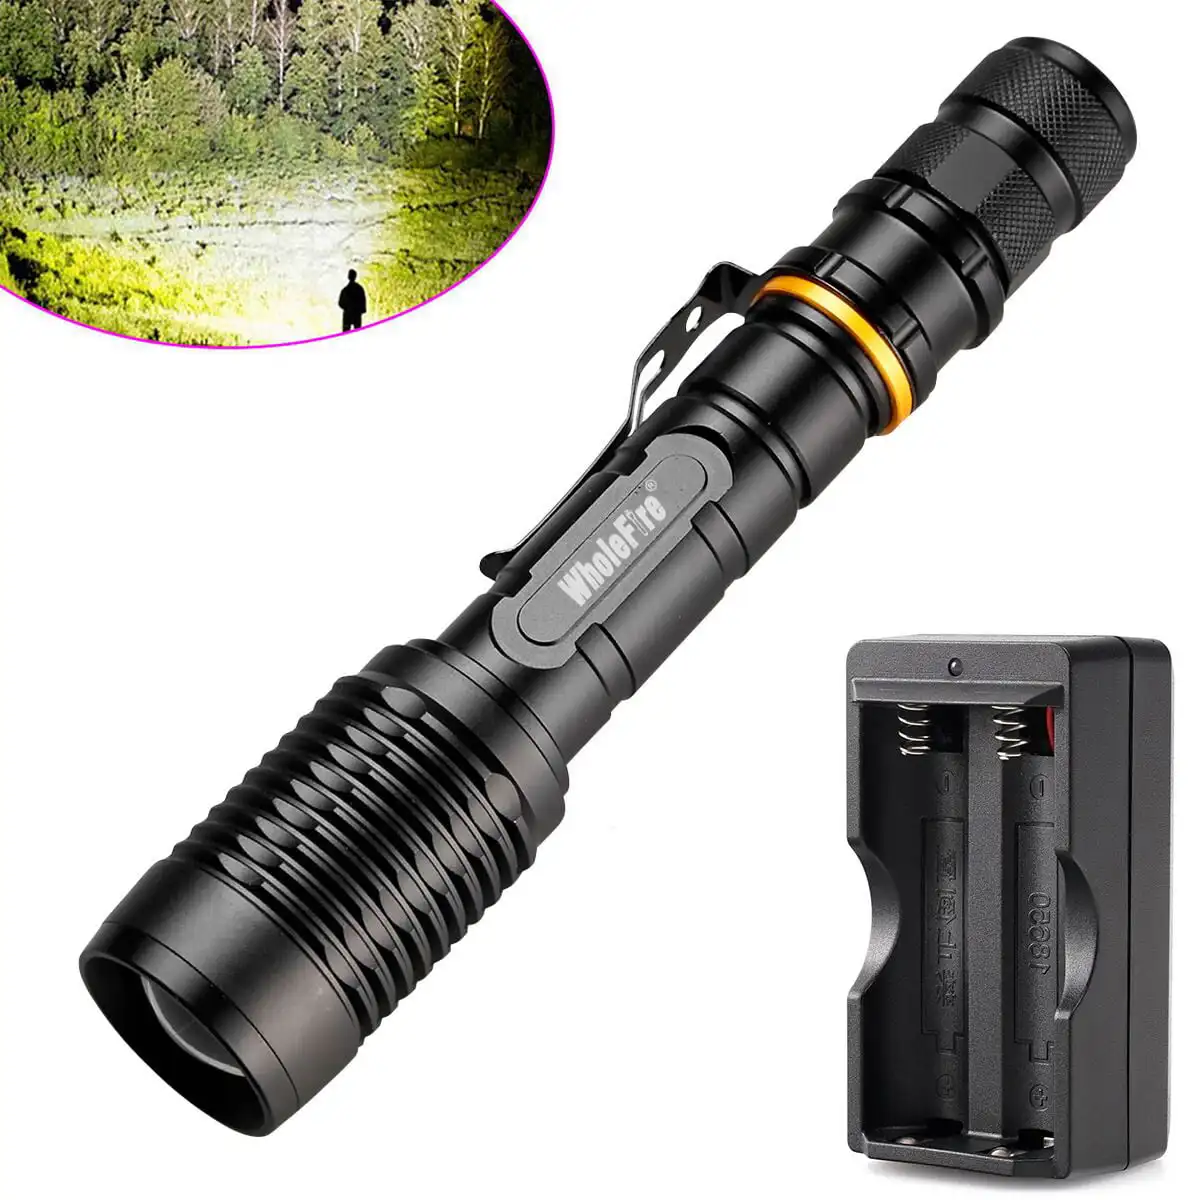 

HMTX L2 3000 Lumens Flashlight LED 5 Lighting Modes Torch Light with Rechargeable Battery & Charger for Outdoor